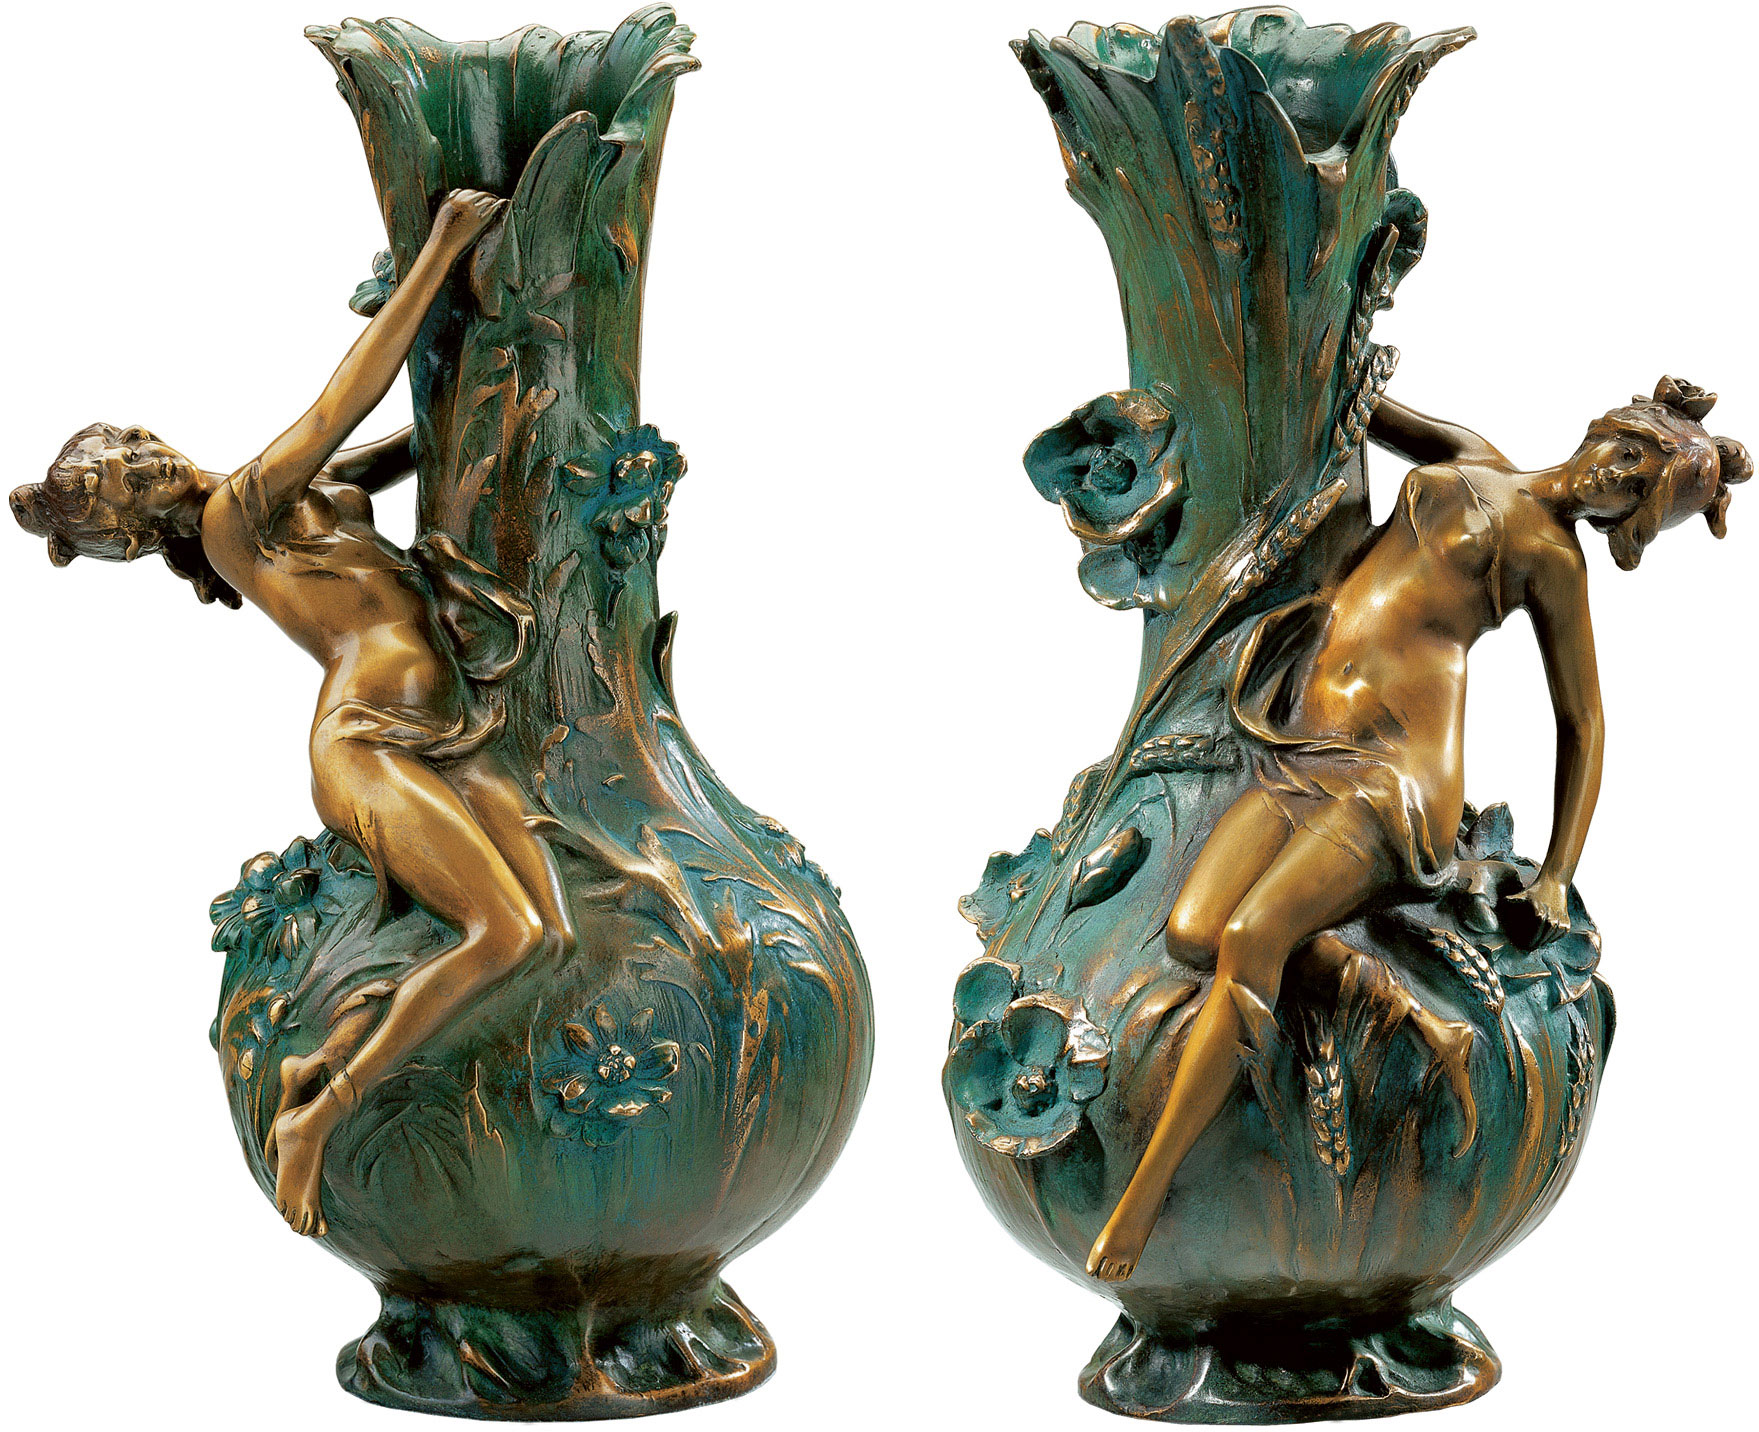 Set of vases "Maguerites" and "Coquelicot", bonded bronze version by Louis Auguste Moreau